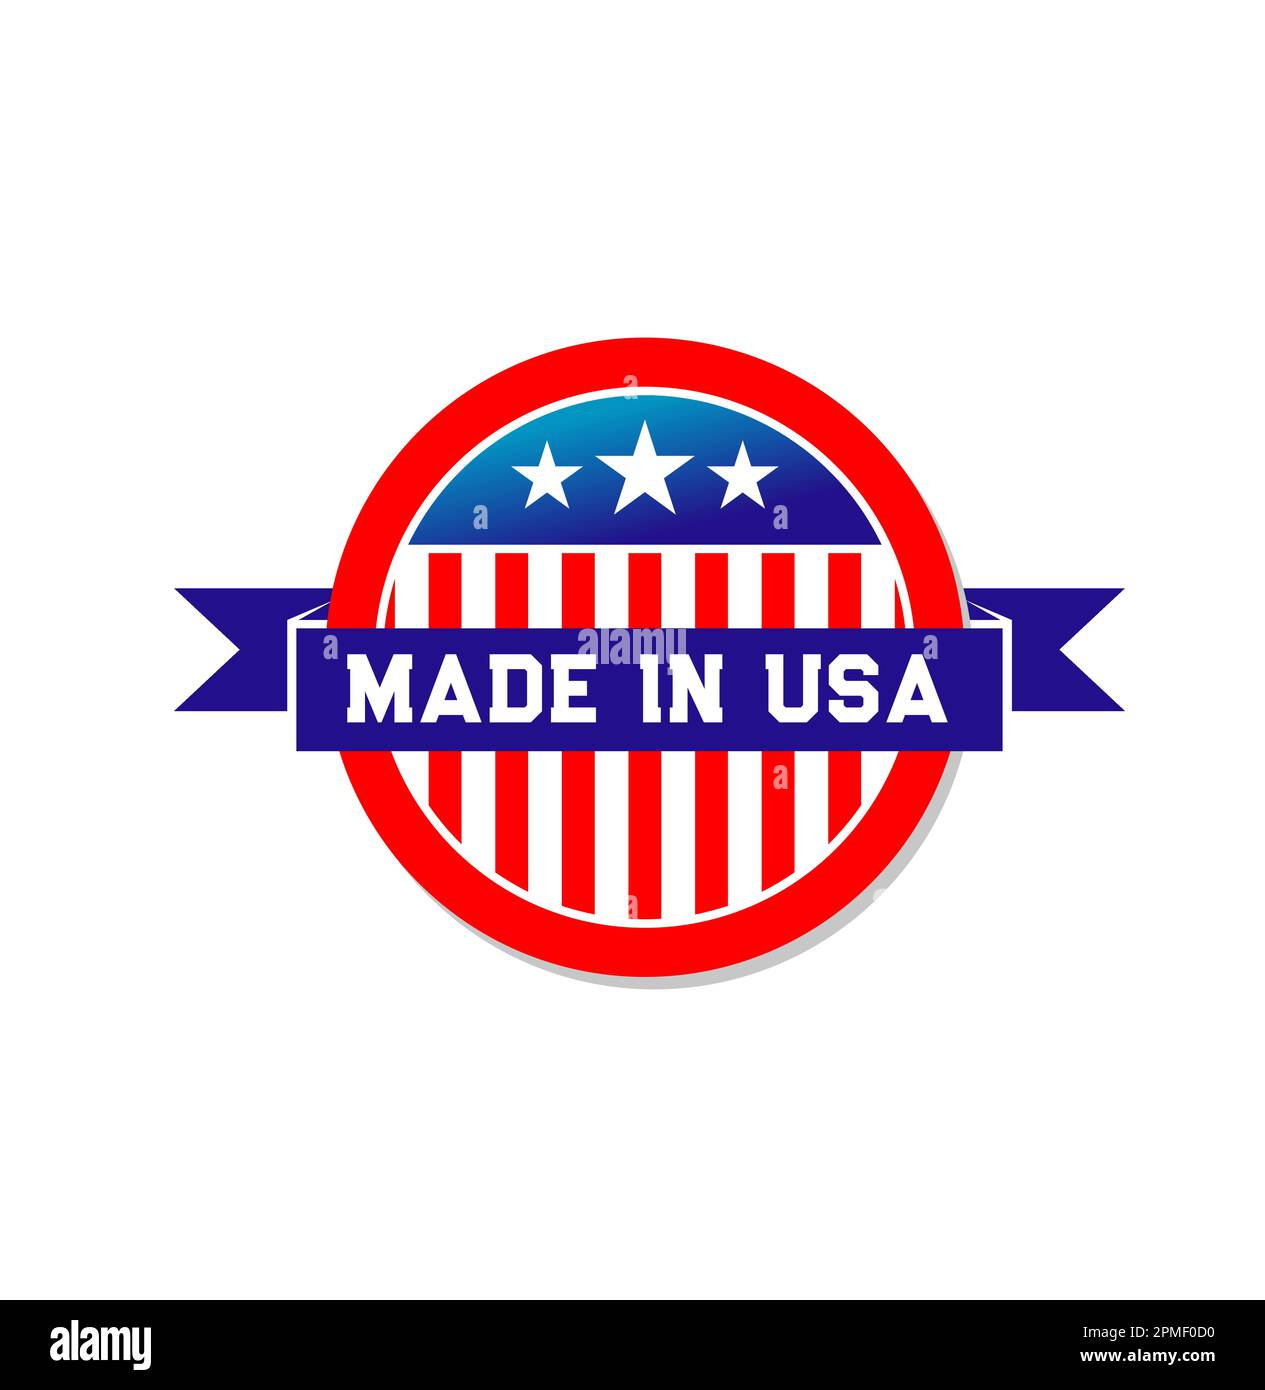 Made in USA label icon with american flag of white red stripes and stars. Vector round badge for America manufactured products quality guarantee. US n Stock Vector